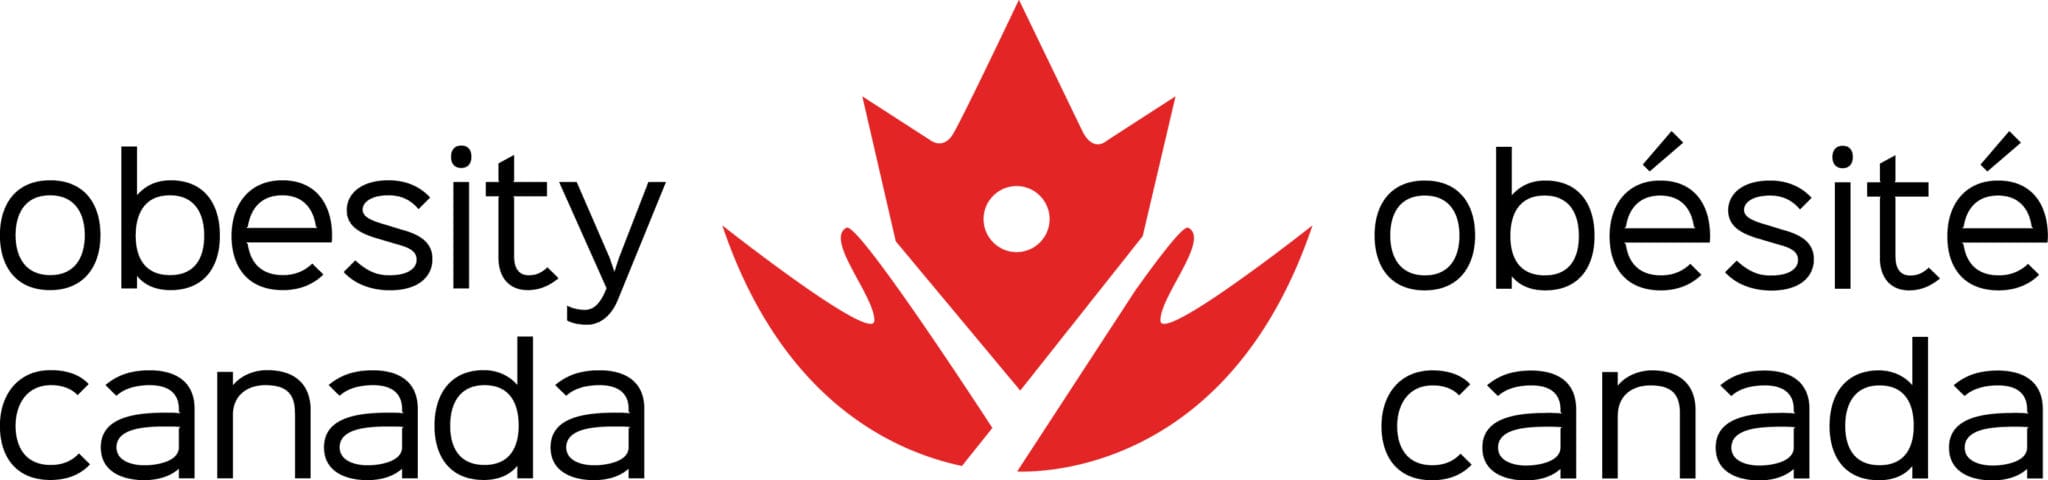 Logo of obesity canada featuring a stylized red maple leaf between the english "obesity" and french "obésité," both followed by "canada" in black text.